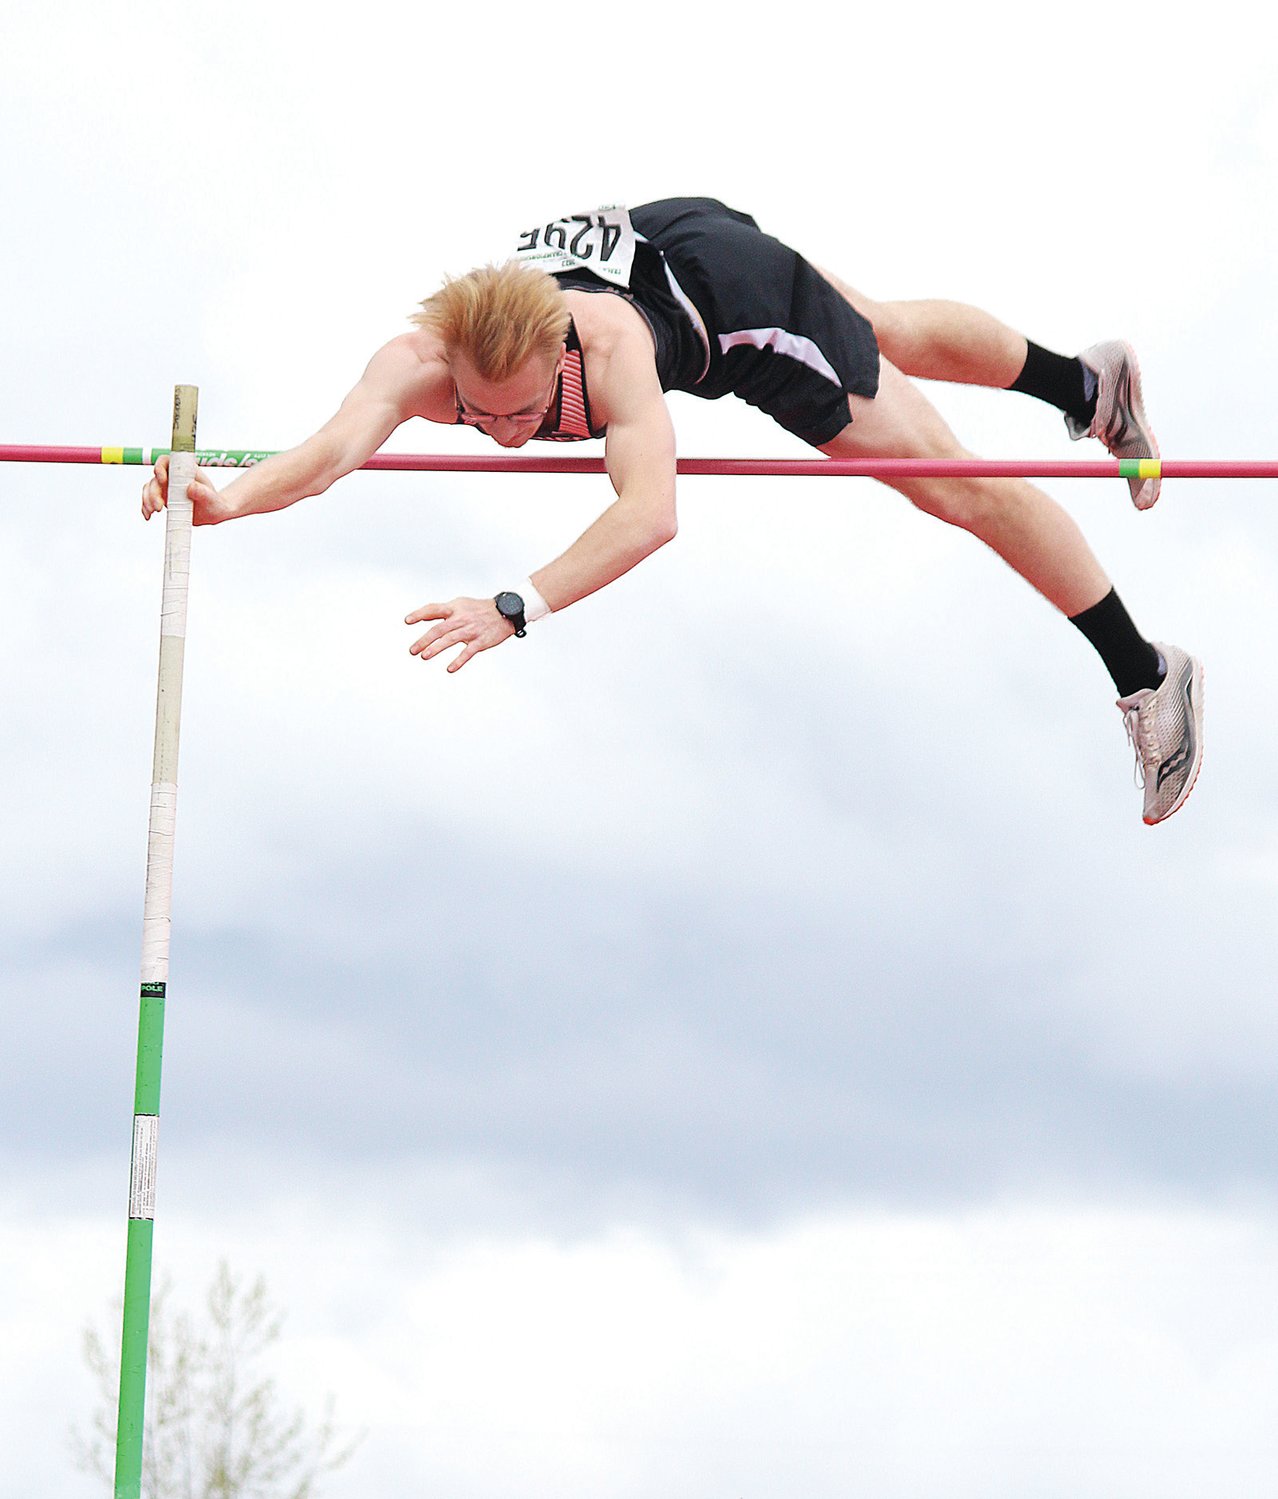 Rainier's Ryan Doidge clears the pole vault bar during the State 2B Boys Pole Vault Finals, which he won with a mark of 14-00.